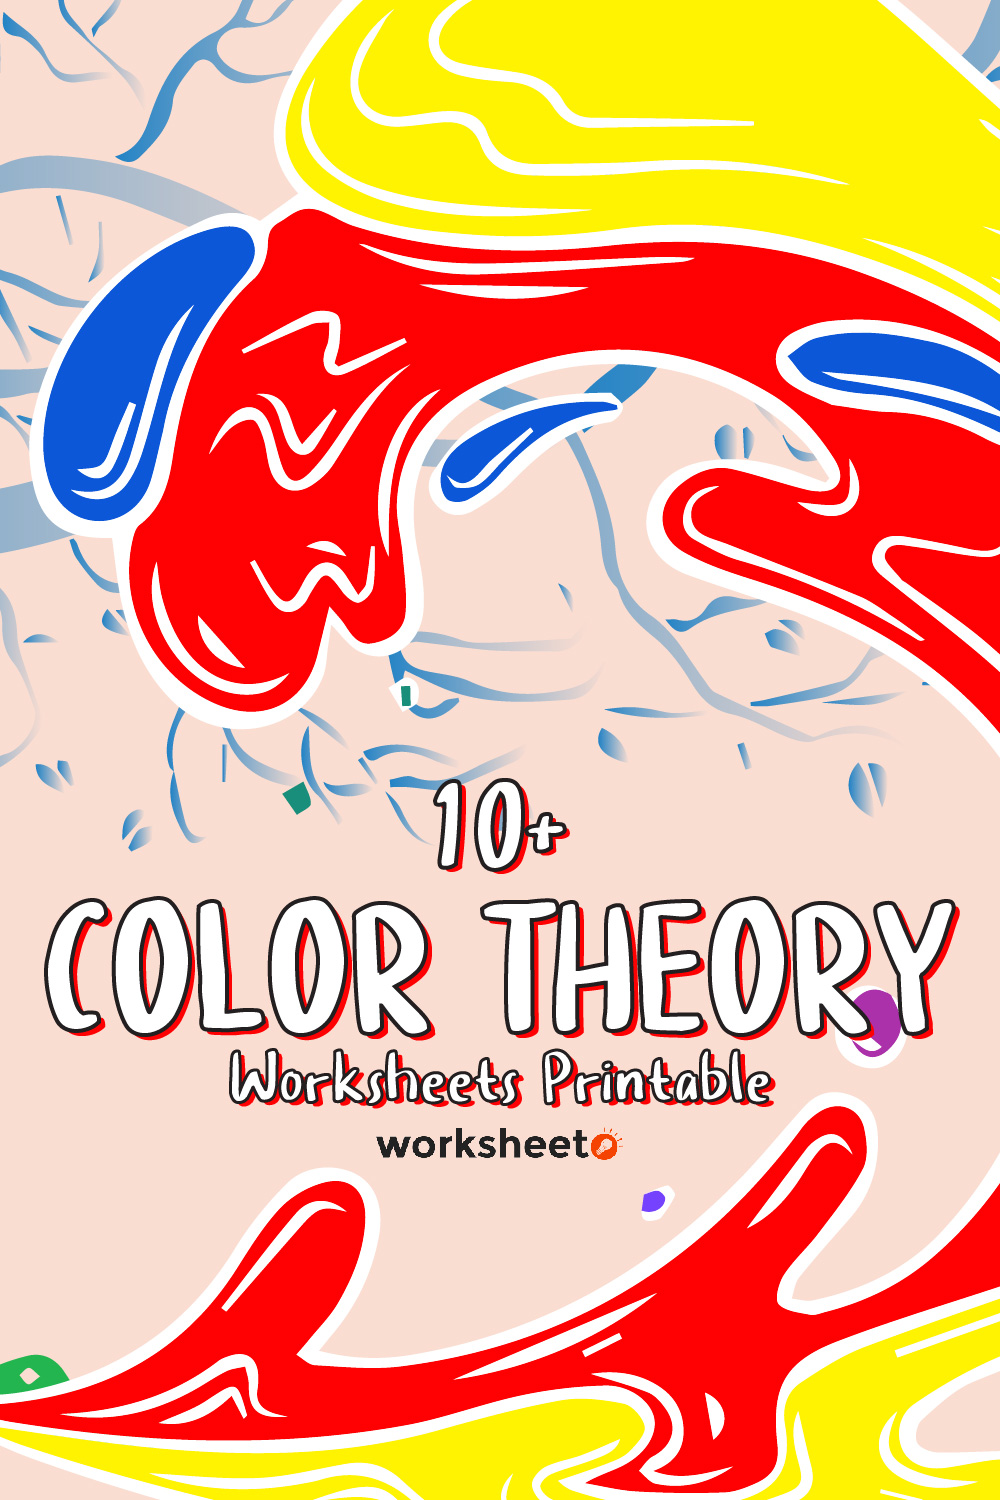 Color Theory Worksheets Printable